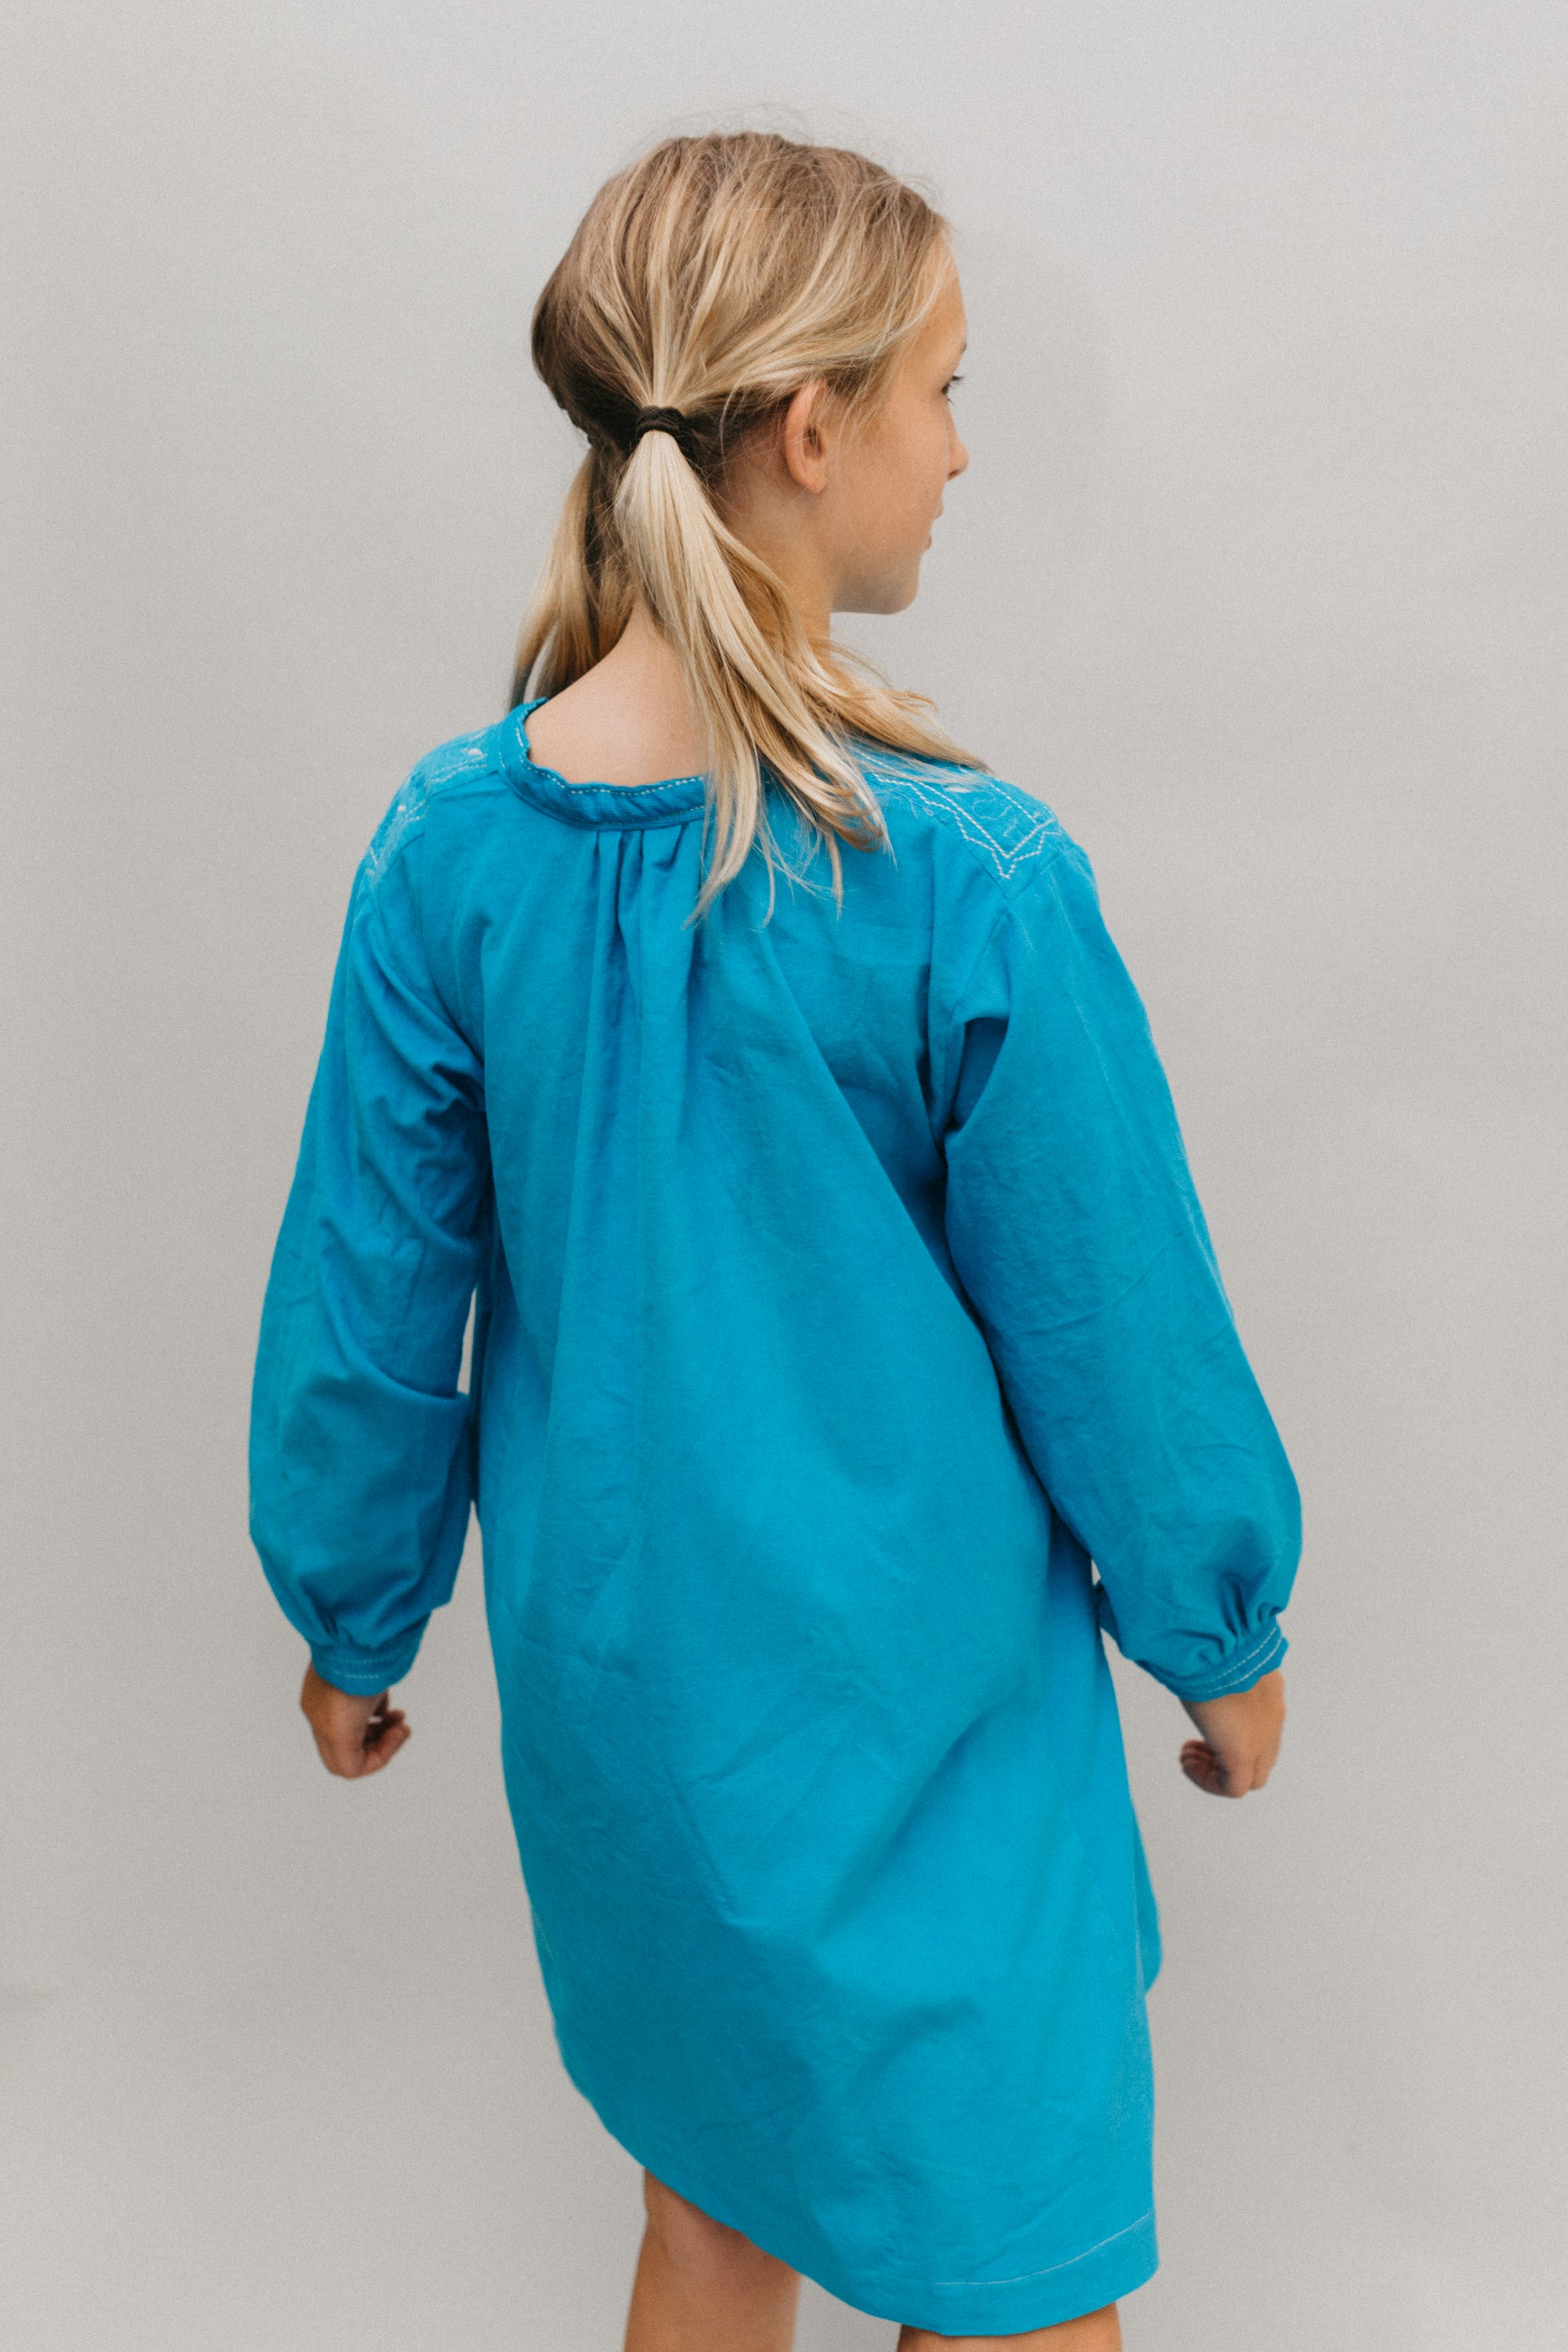 Photo of young girl wearing a blue corduroy Smock. Model had back to camera.  Photo shows gathering at neckline and back view.